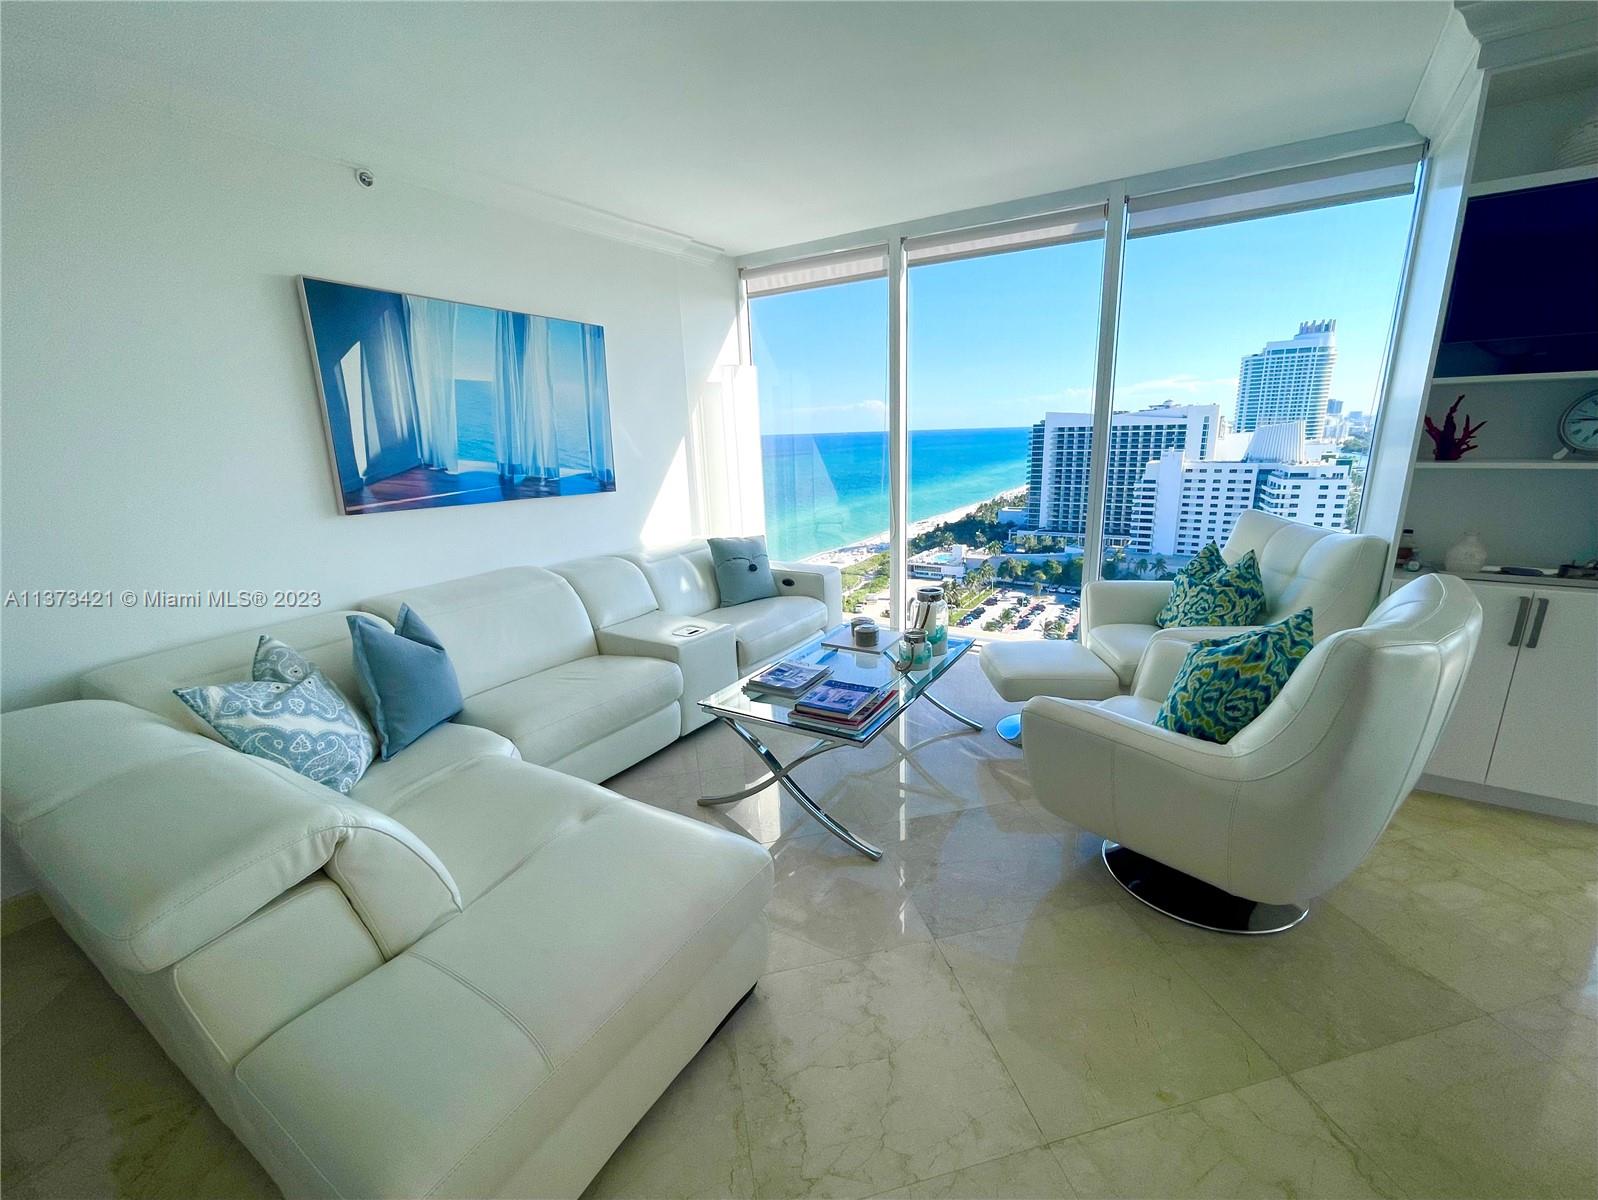 Photo 2 of Blue and Green Diamond Green Apt 2305 in Miami Beach - MLS A11373421